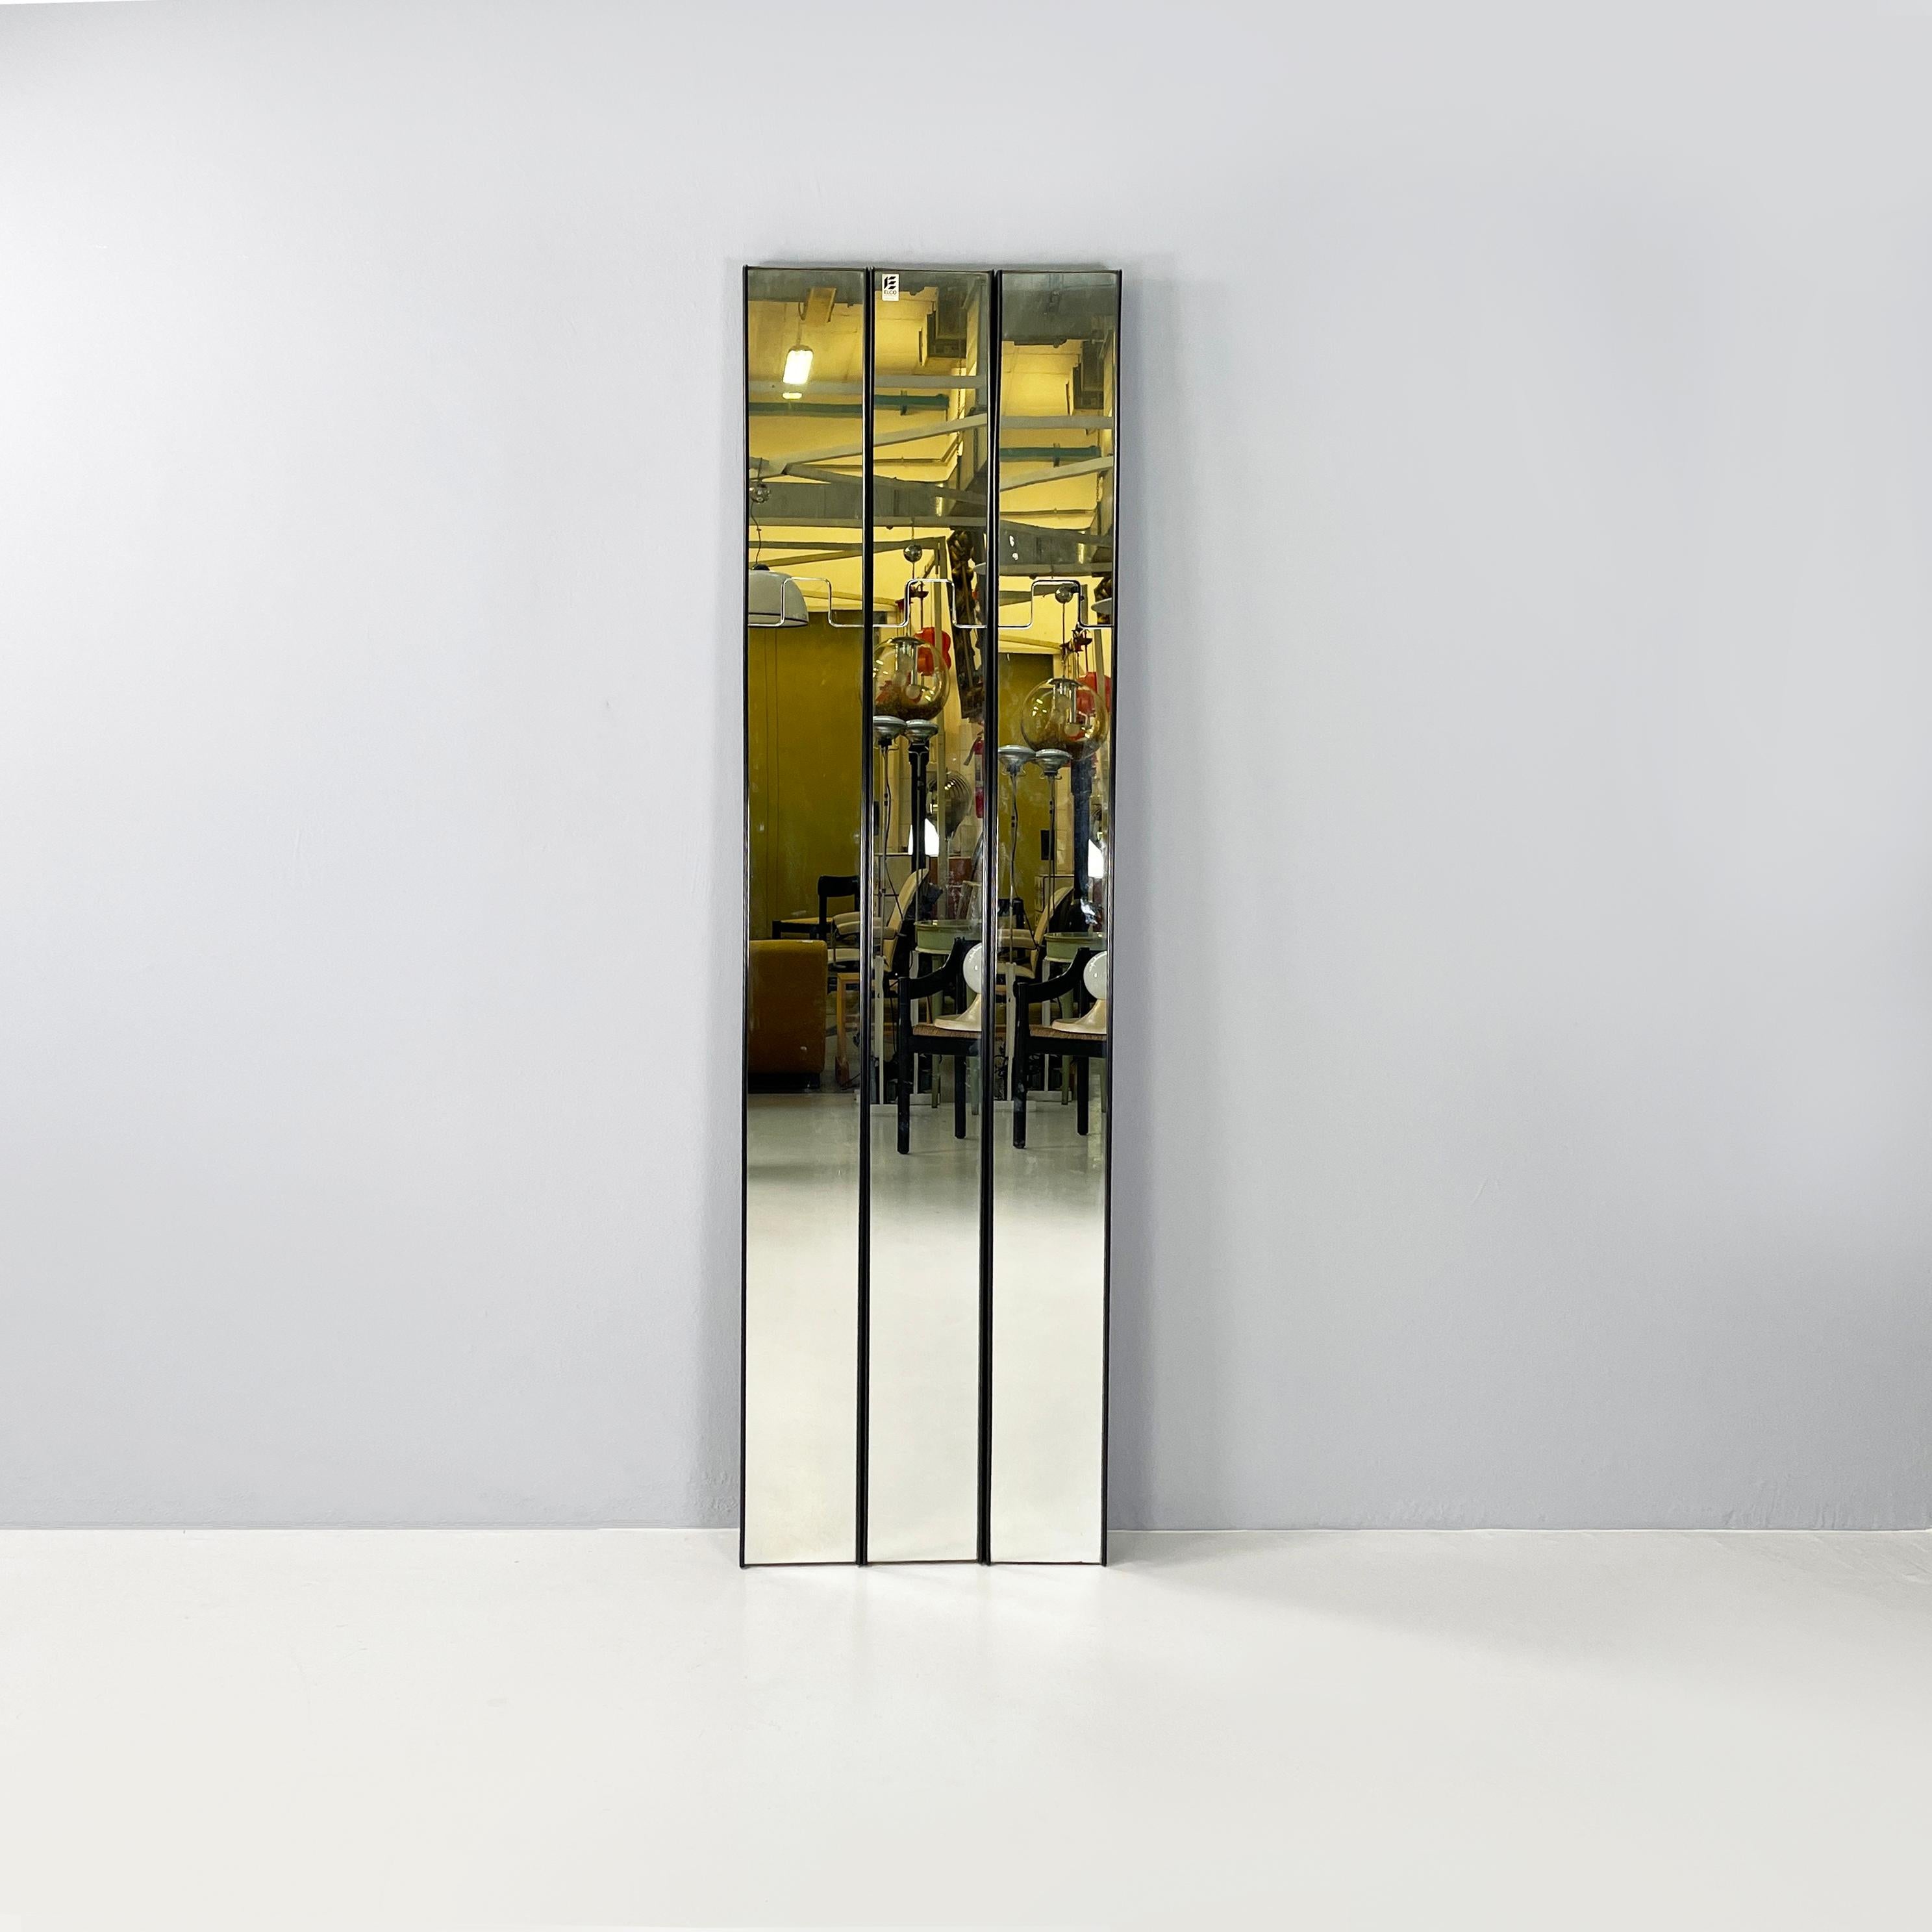 Modern Italian modern wall mirror hanger Gronda by Luciano Bertoncini for Elco, 1970s For Sale